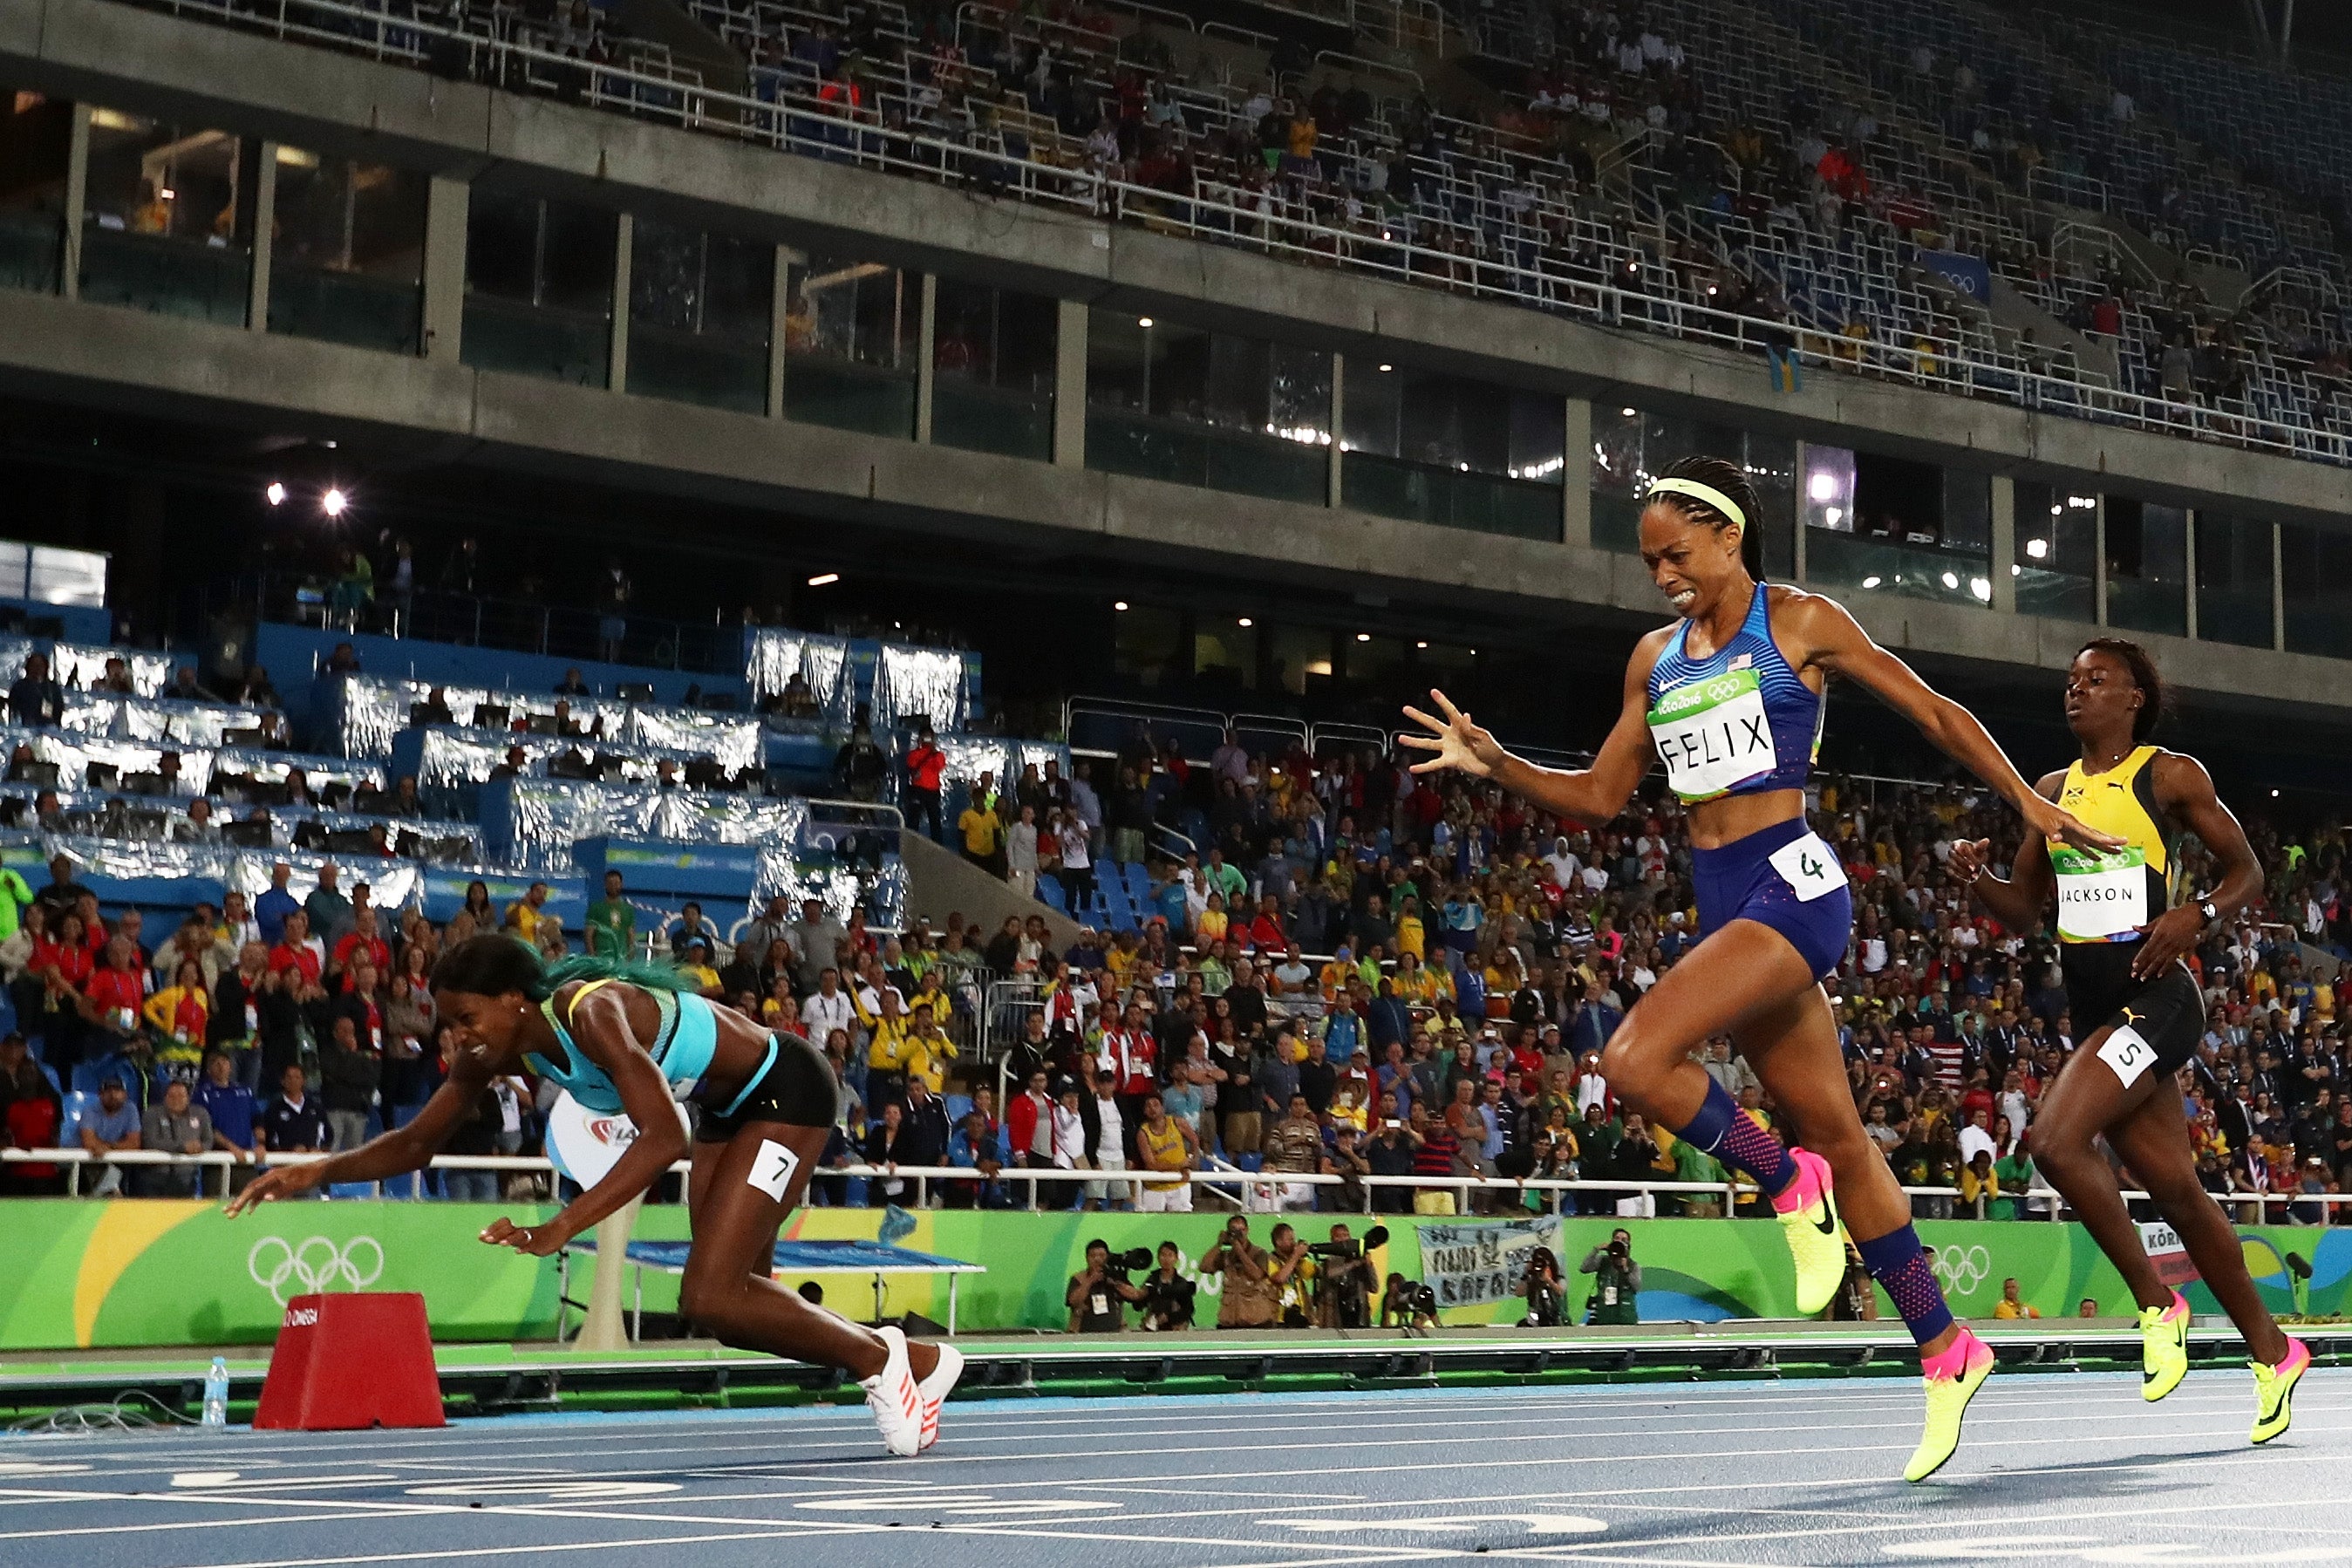 Shaunae Miller's Finish Line Dive At the Olympics Has Social Media Divided
